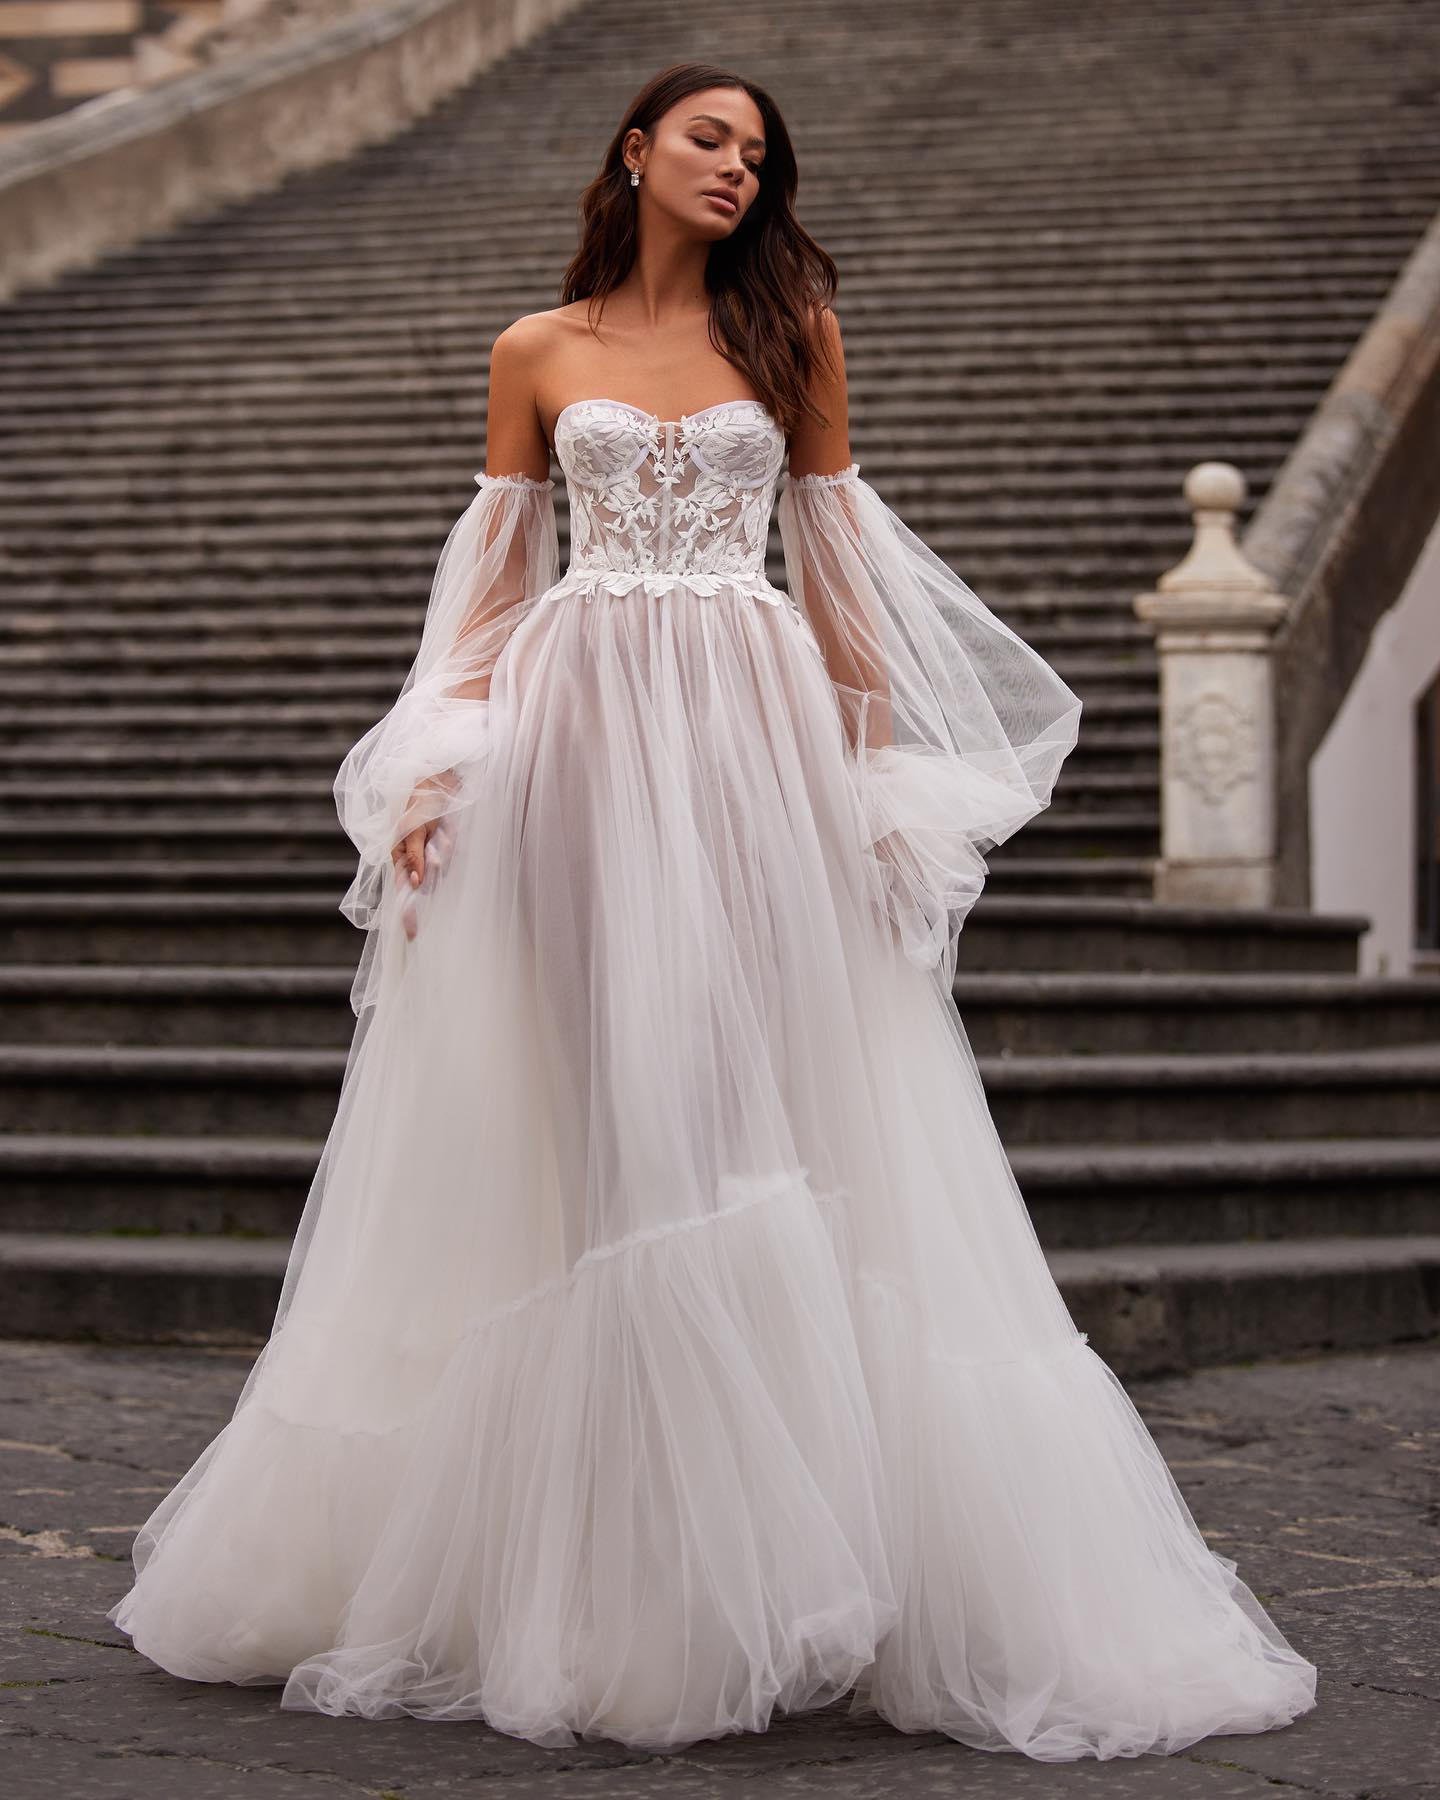 GW919 - A-Line Strapless Long Sleeves Appliqued Pleated Tulle Wedding Dress